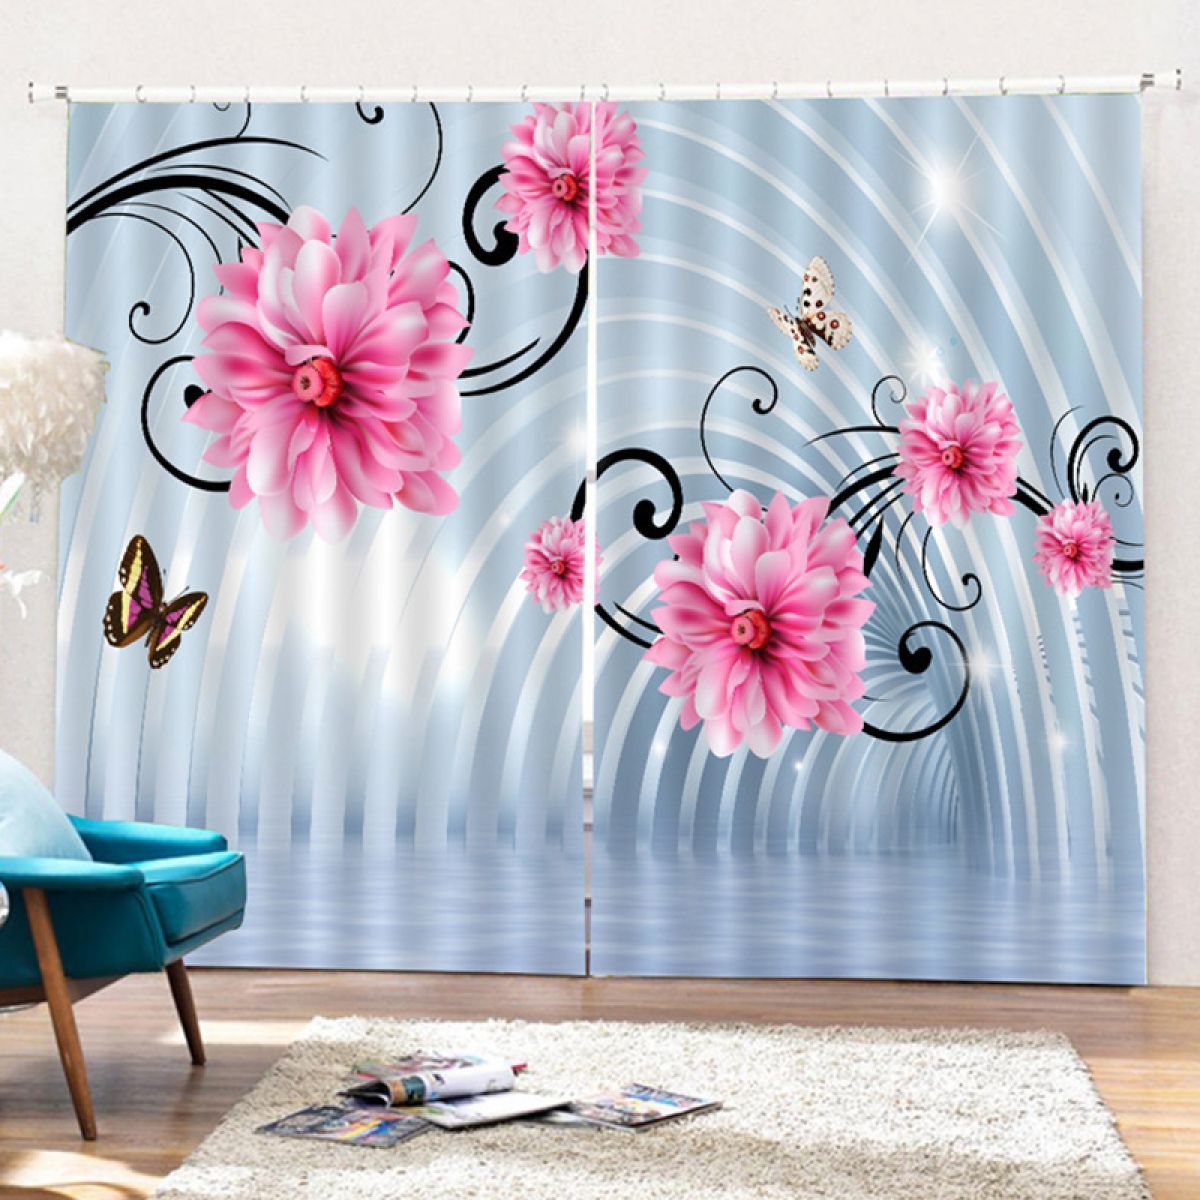 Cloister Flower And Butterfly Printed Window Curtain Home Decor